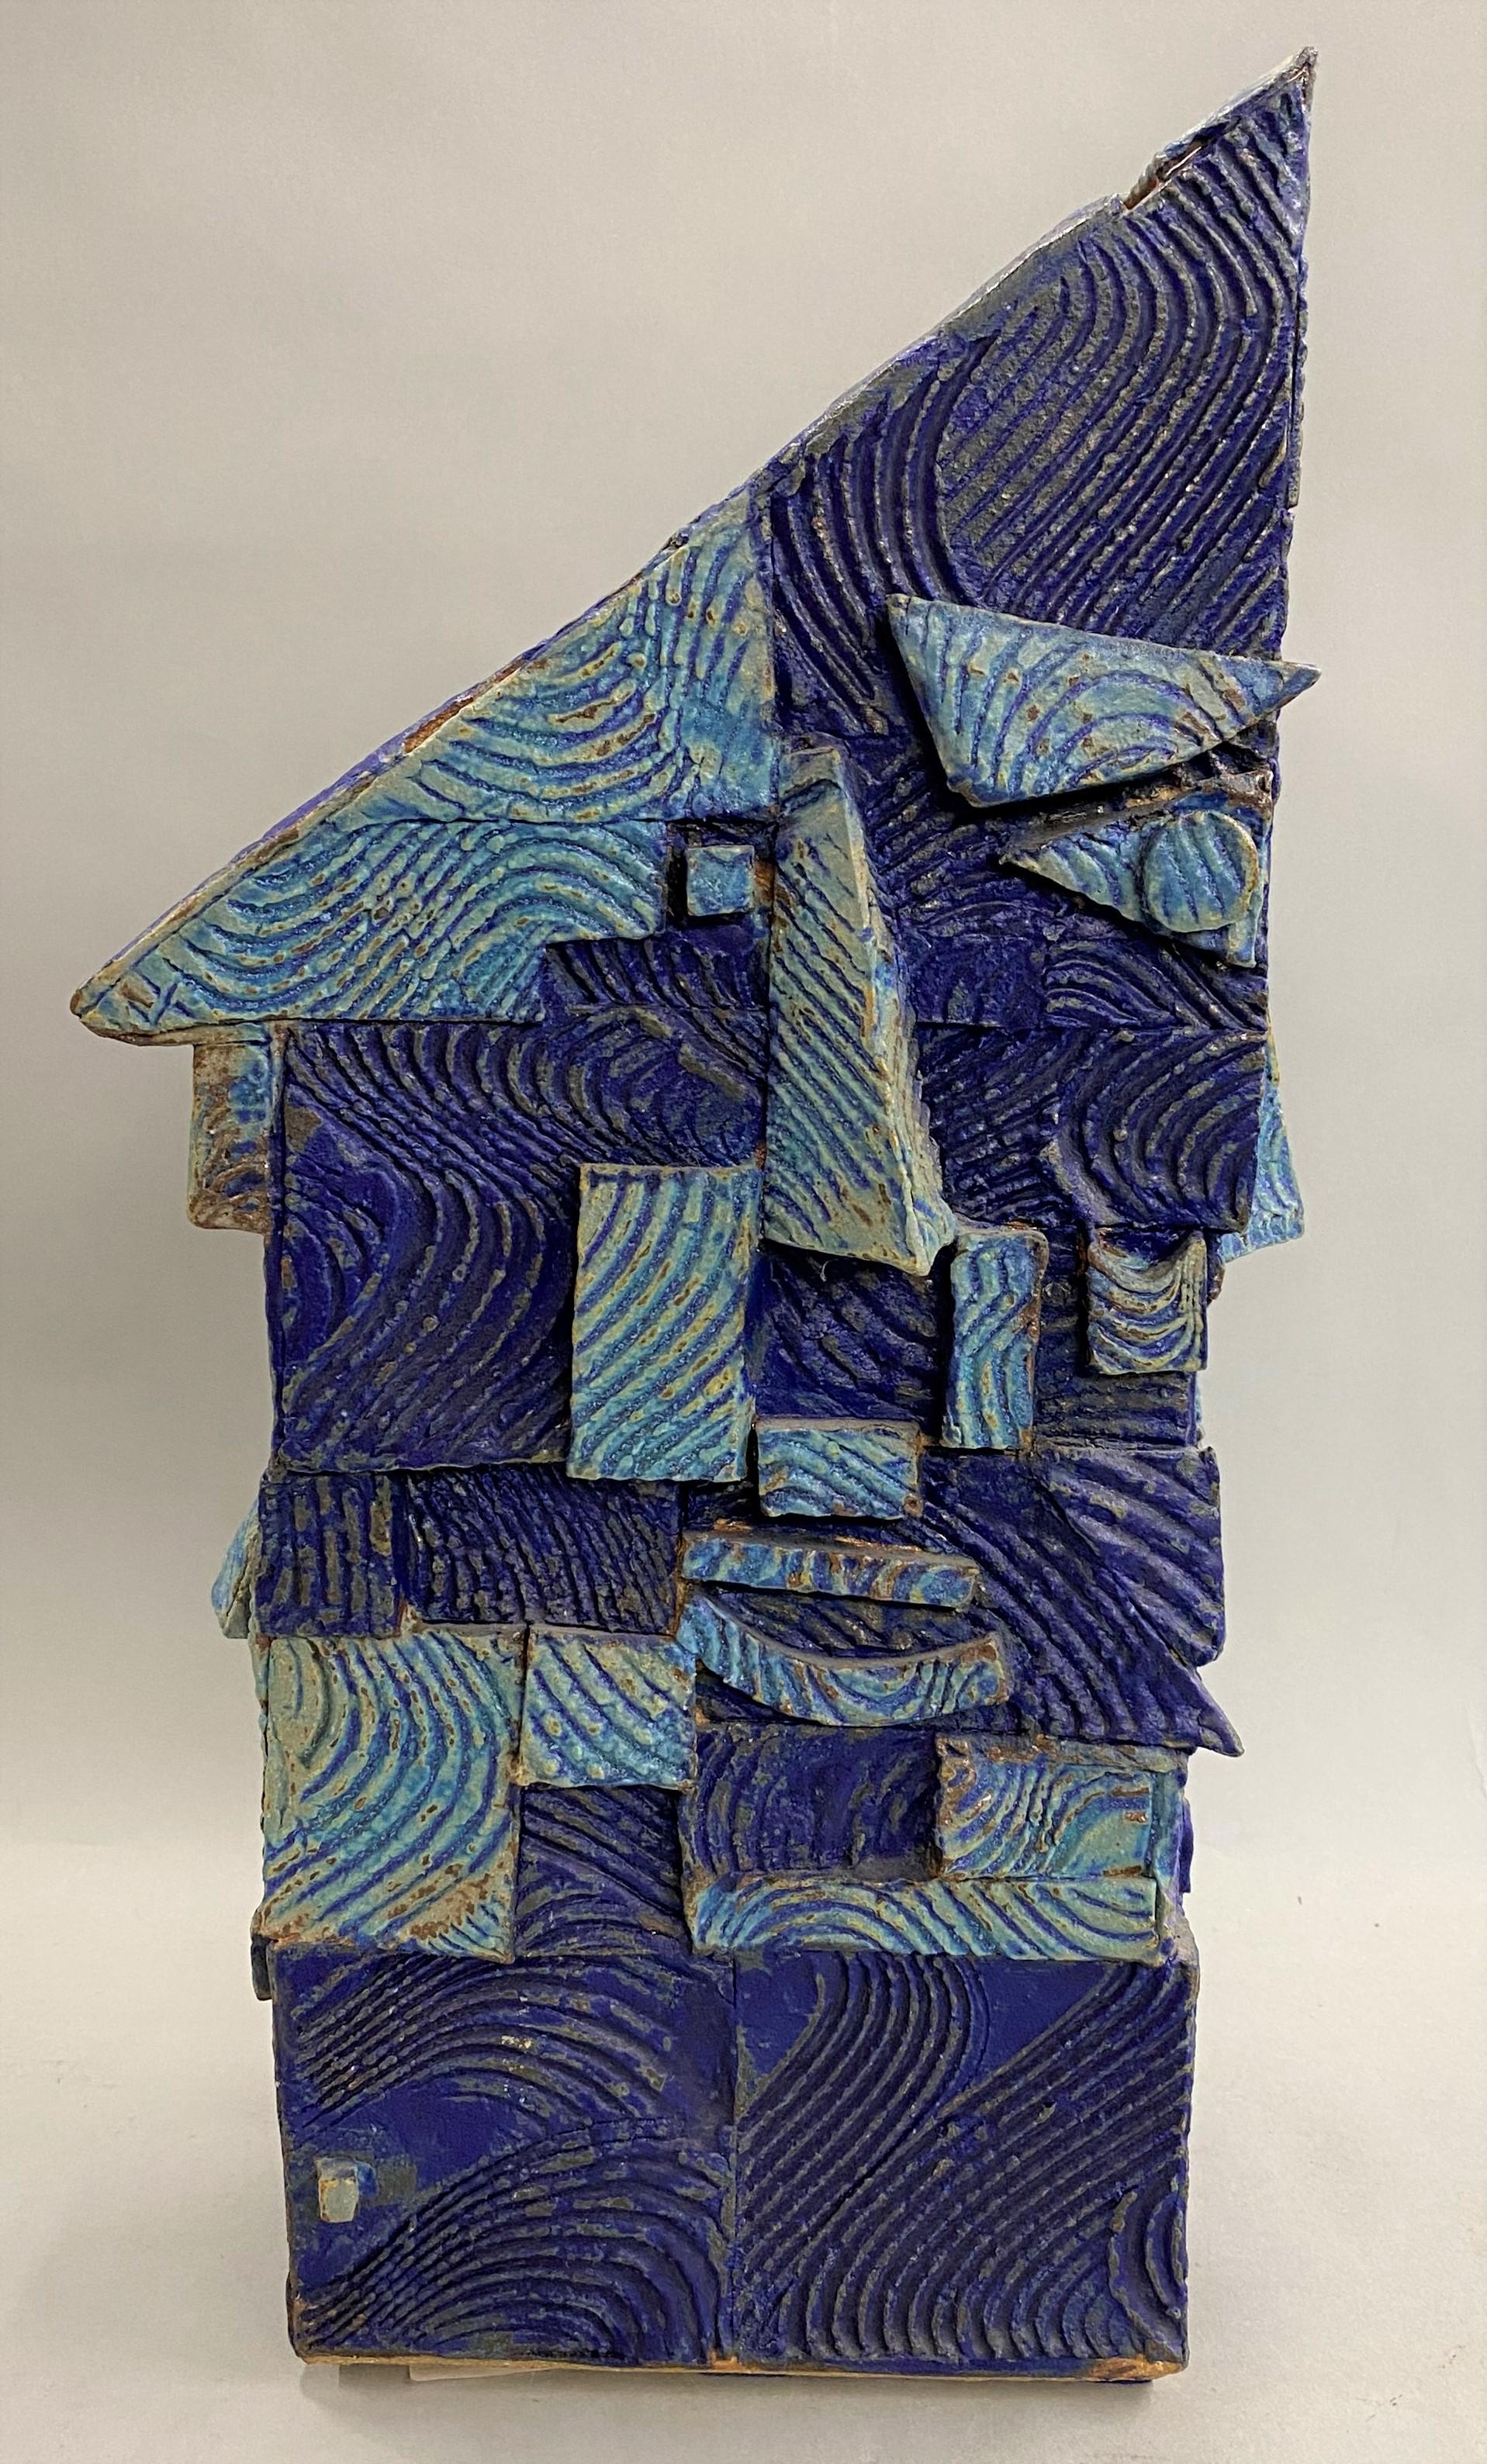 Bird House or Face Vase - Abstract Art by Gerry Williams